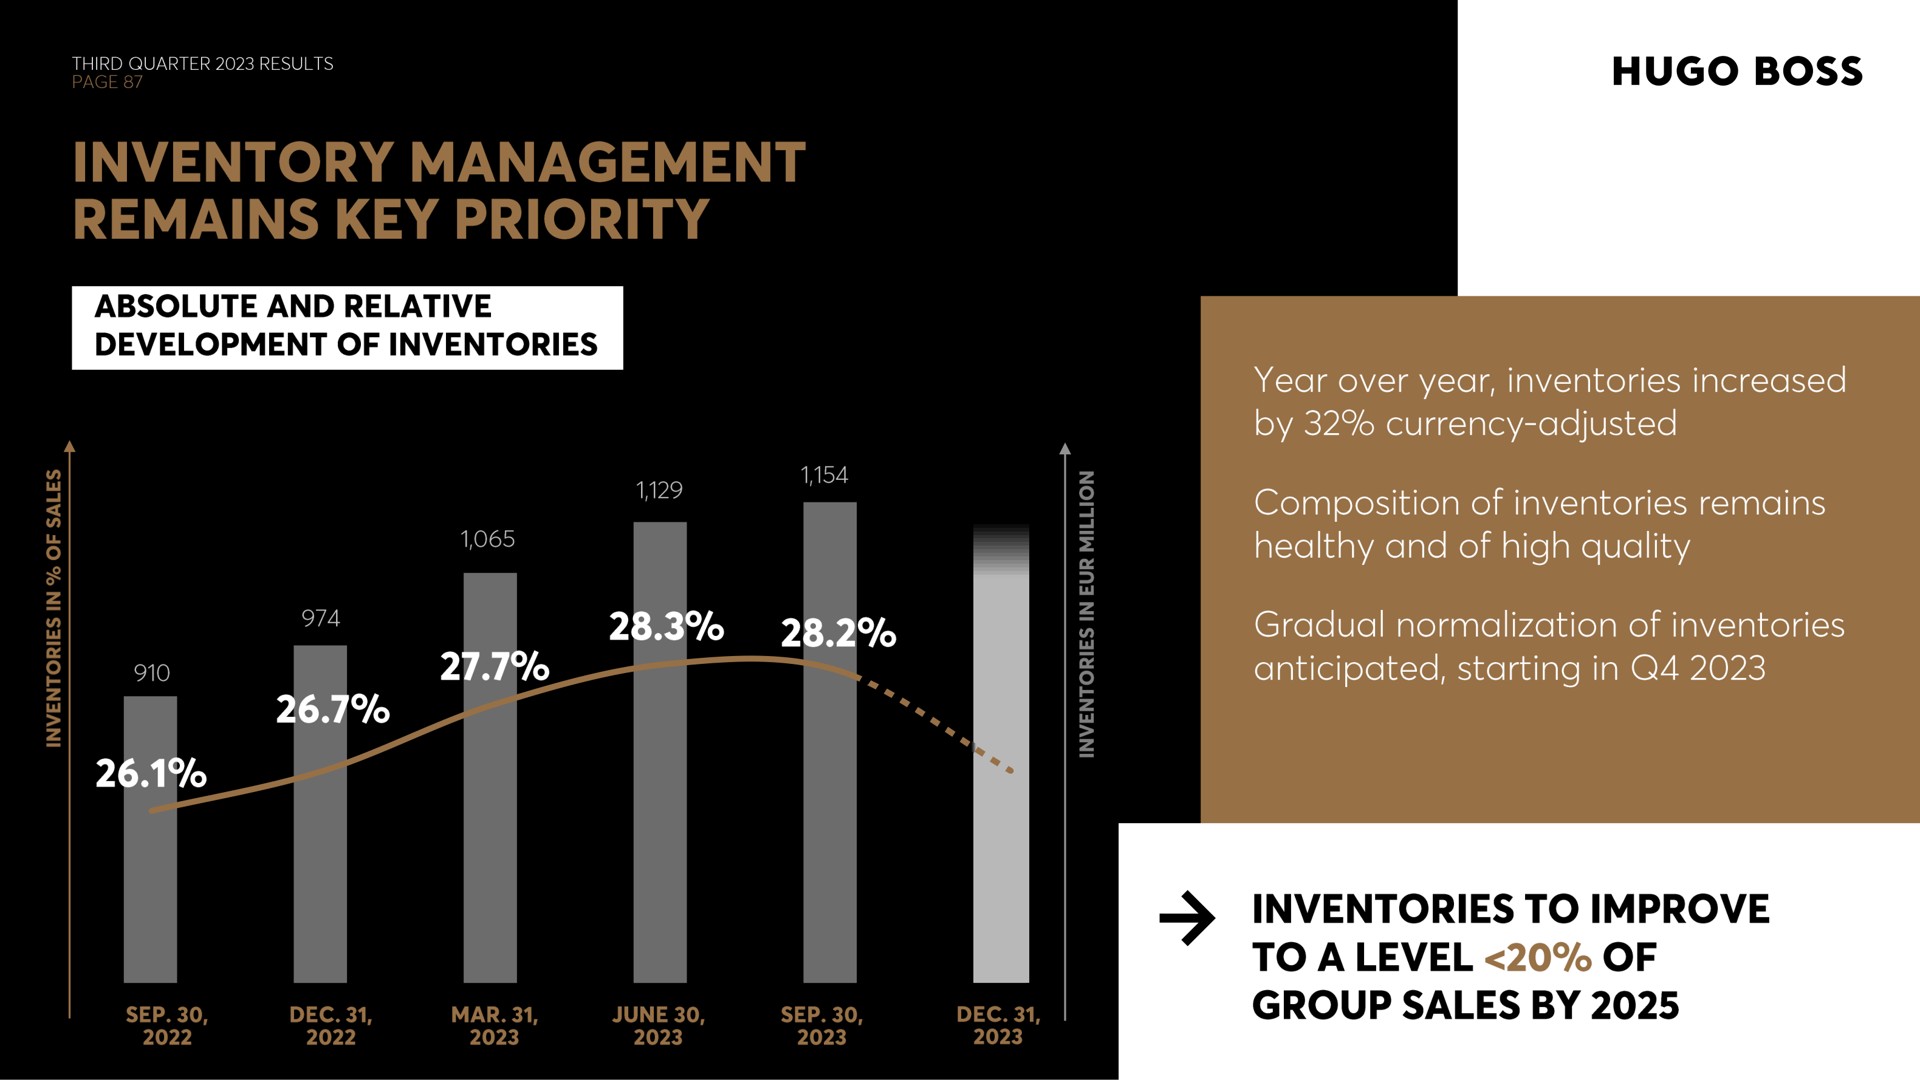 inventory management remains key priority boss absolute and relative development of inventories inventories to improve group sales by of | Hugo Boss